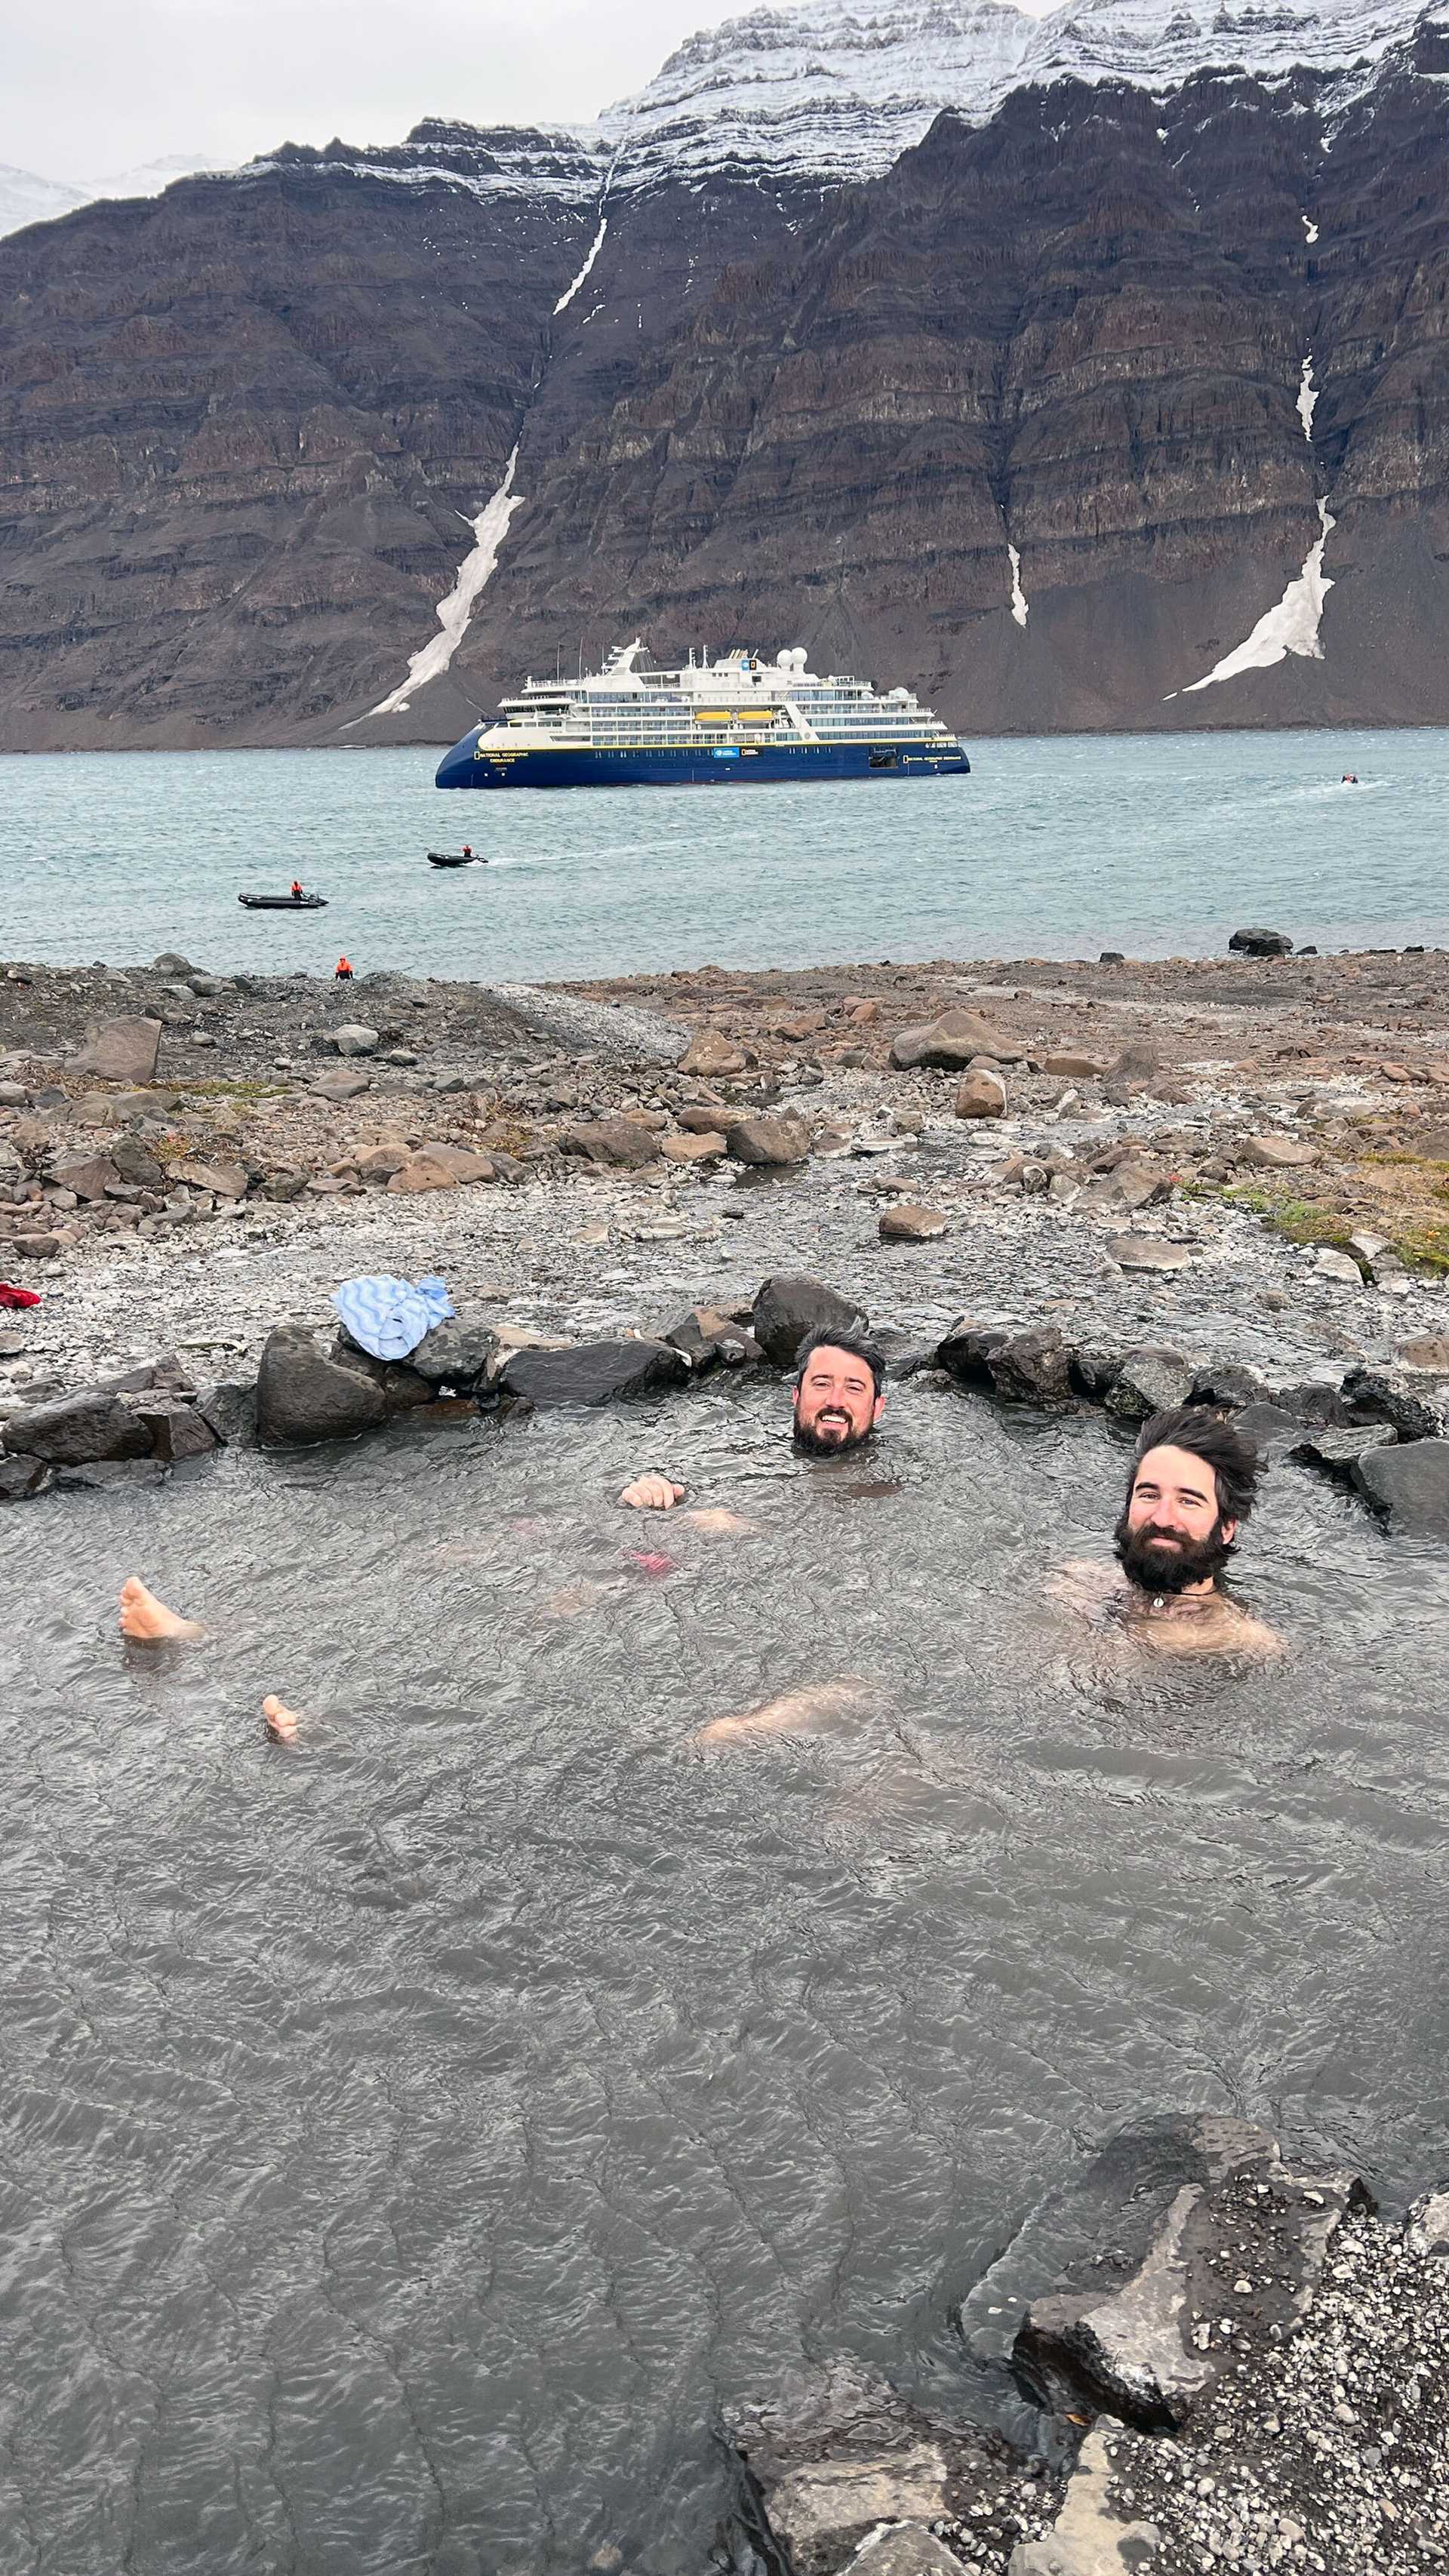 two men in a hot spring with ship in the background